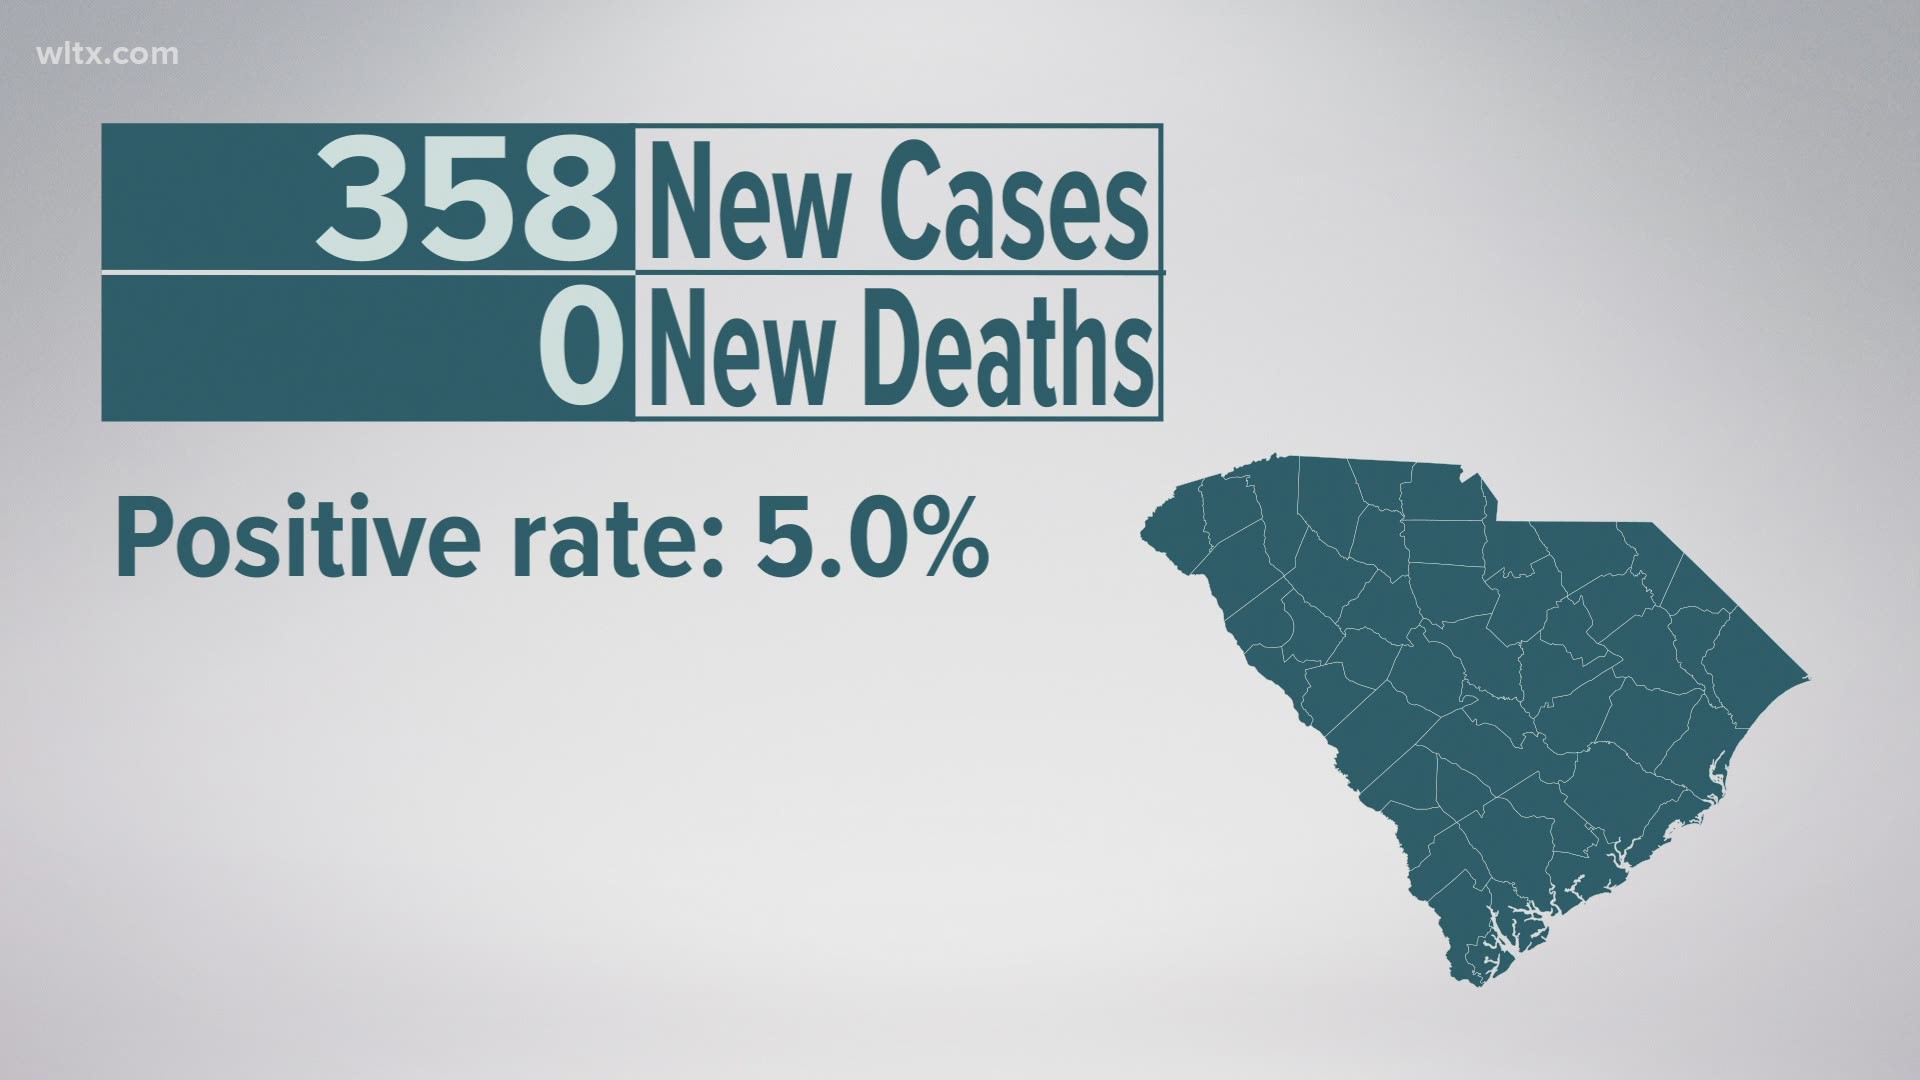 Almost 7 million total tests have been performed in South Carolina since the beginning of the coronavirus pandemic shutdown in March 2020.